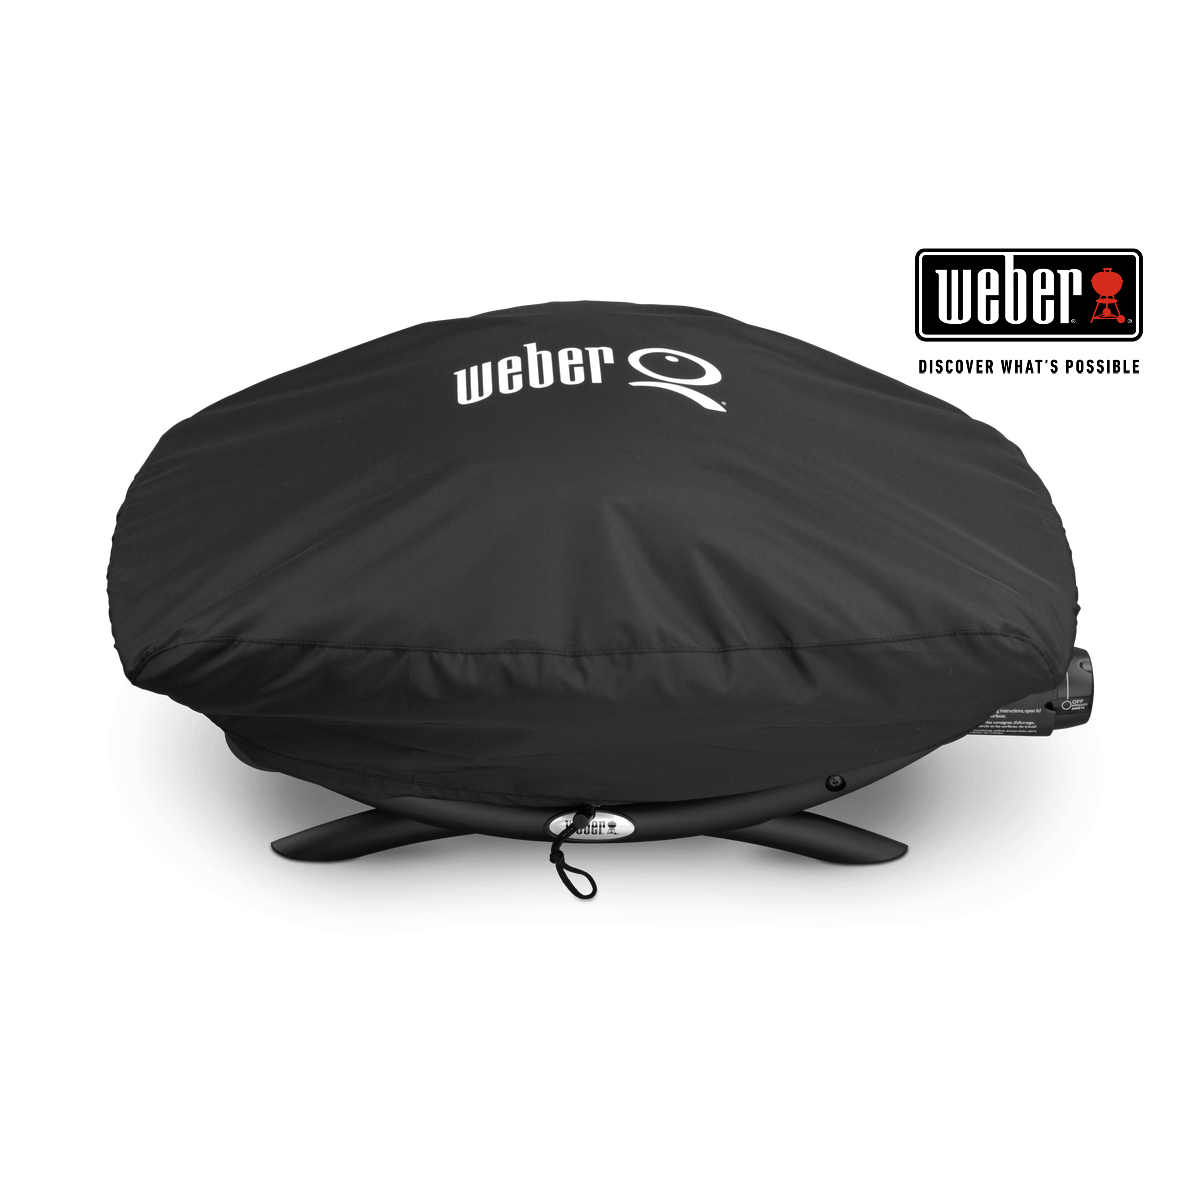 2000 Series Weber 7118 Premium Grill Cover for 200 